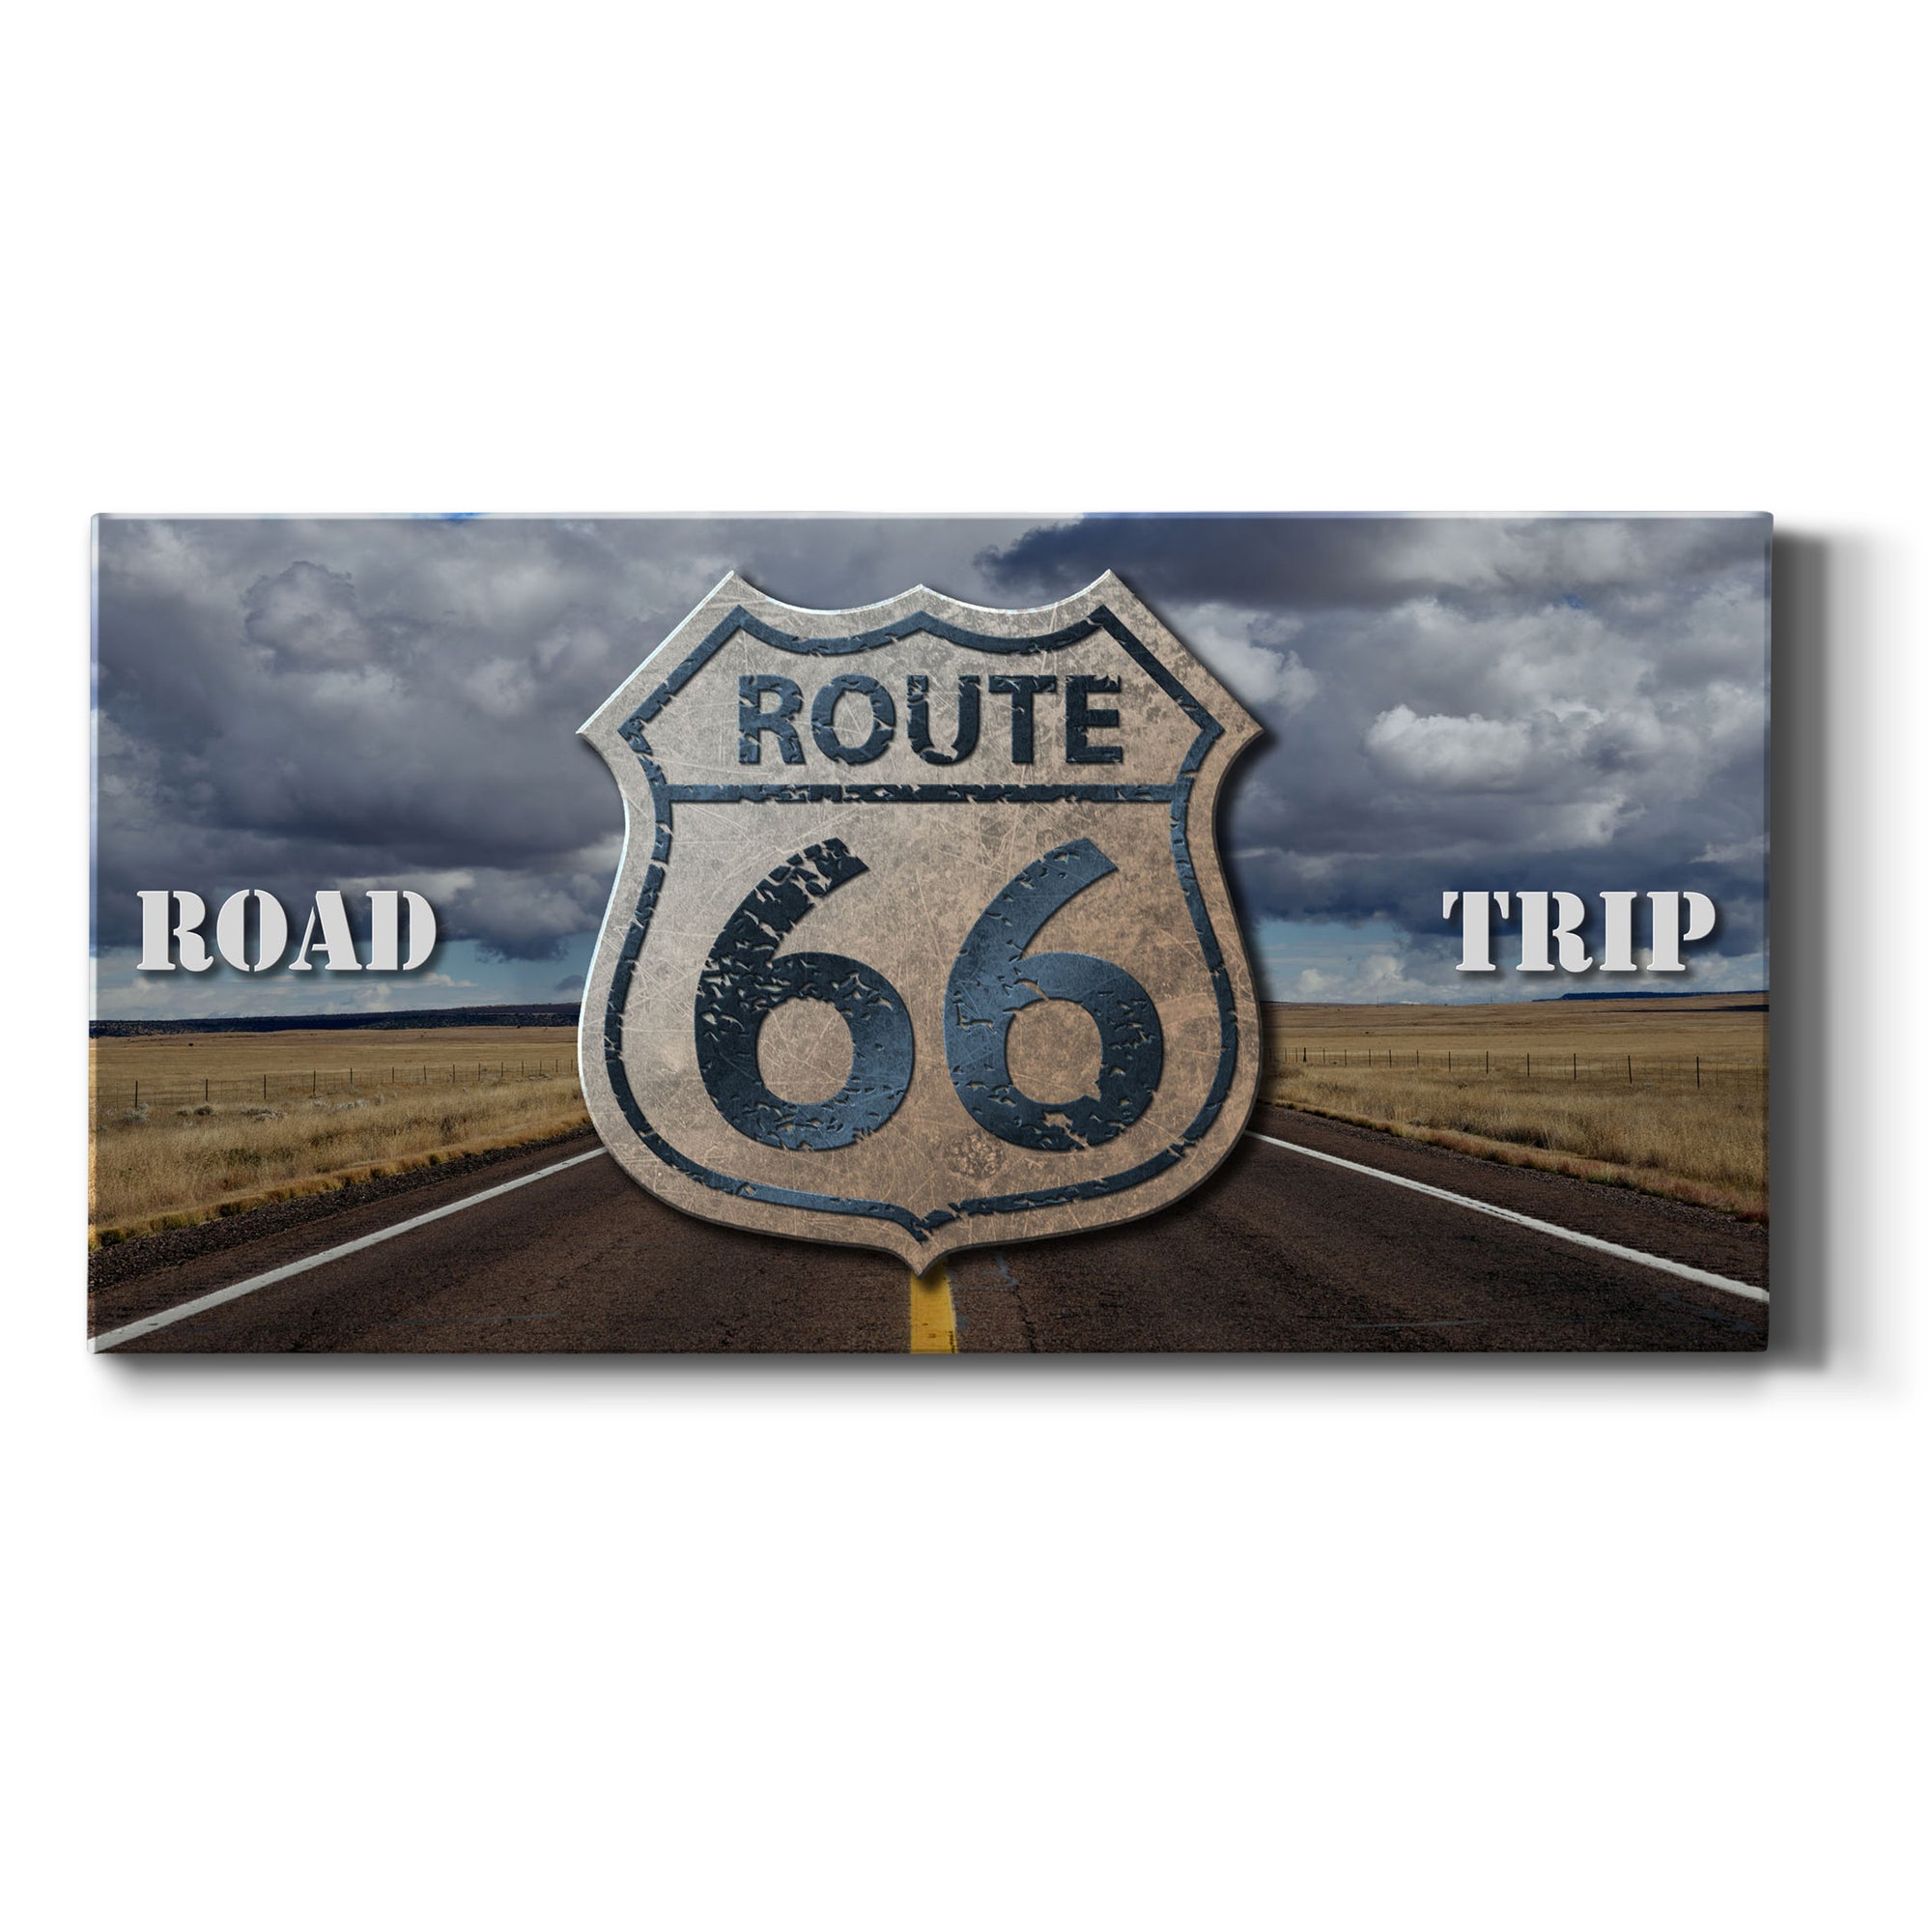 Road Trip on Route 66